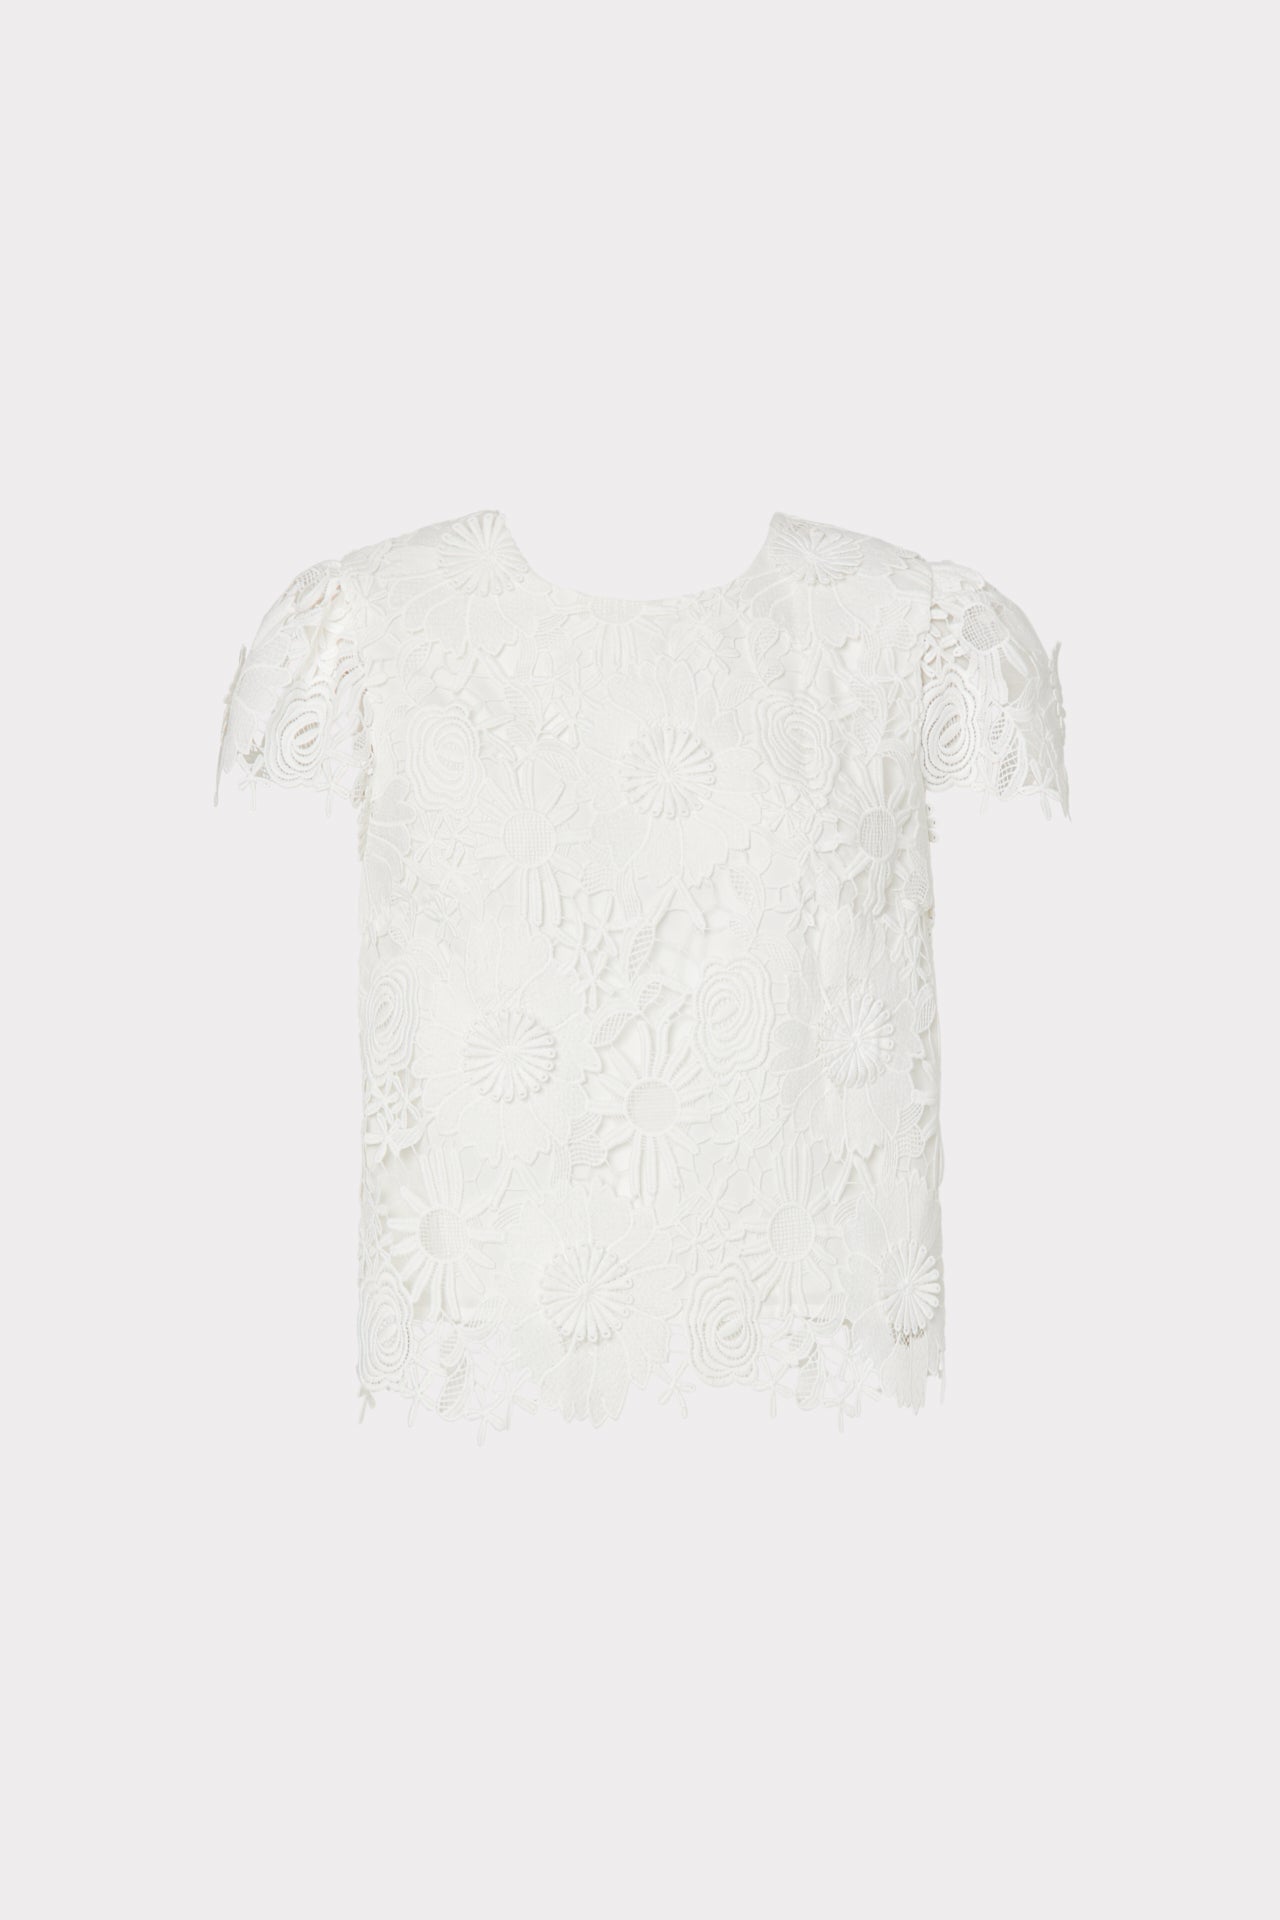 3D Lace Baby Tee